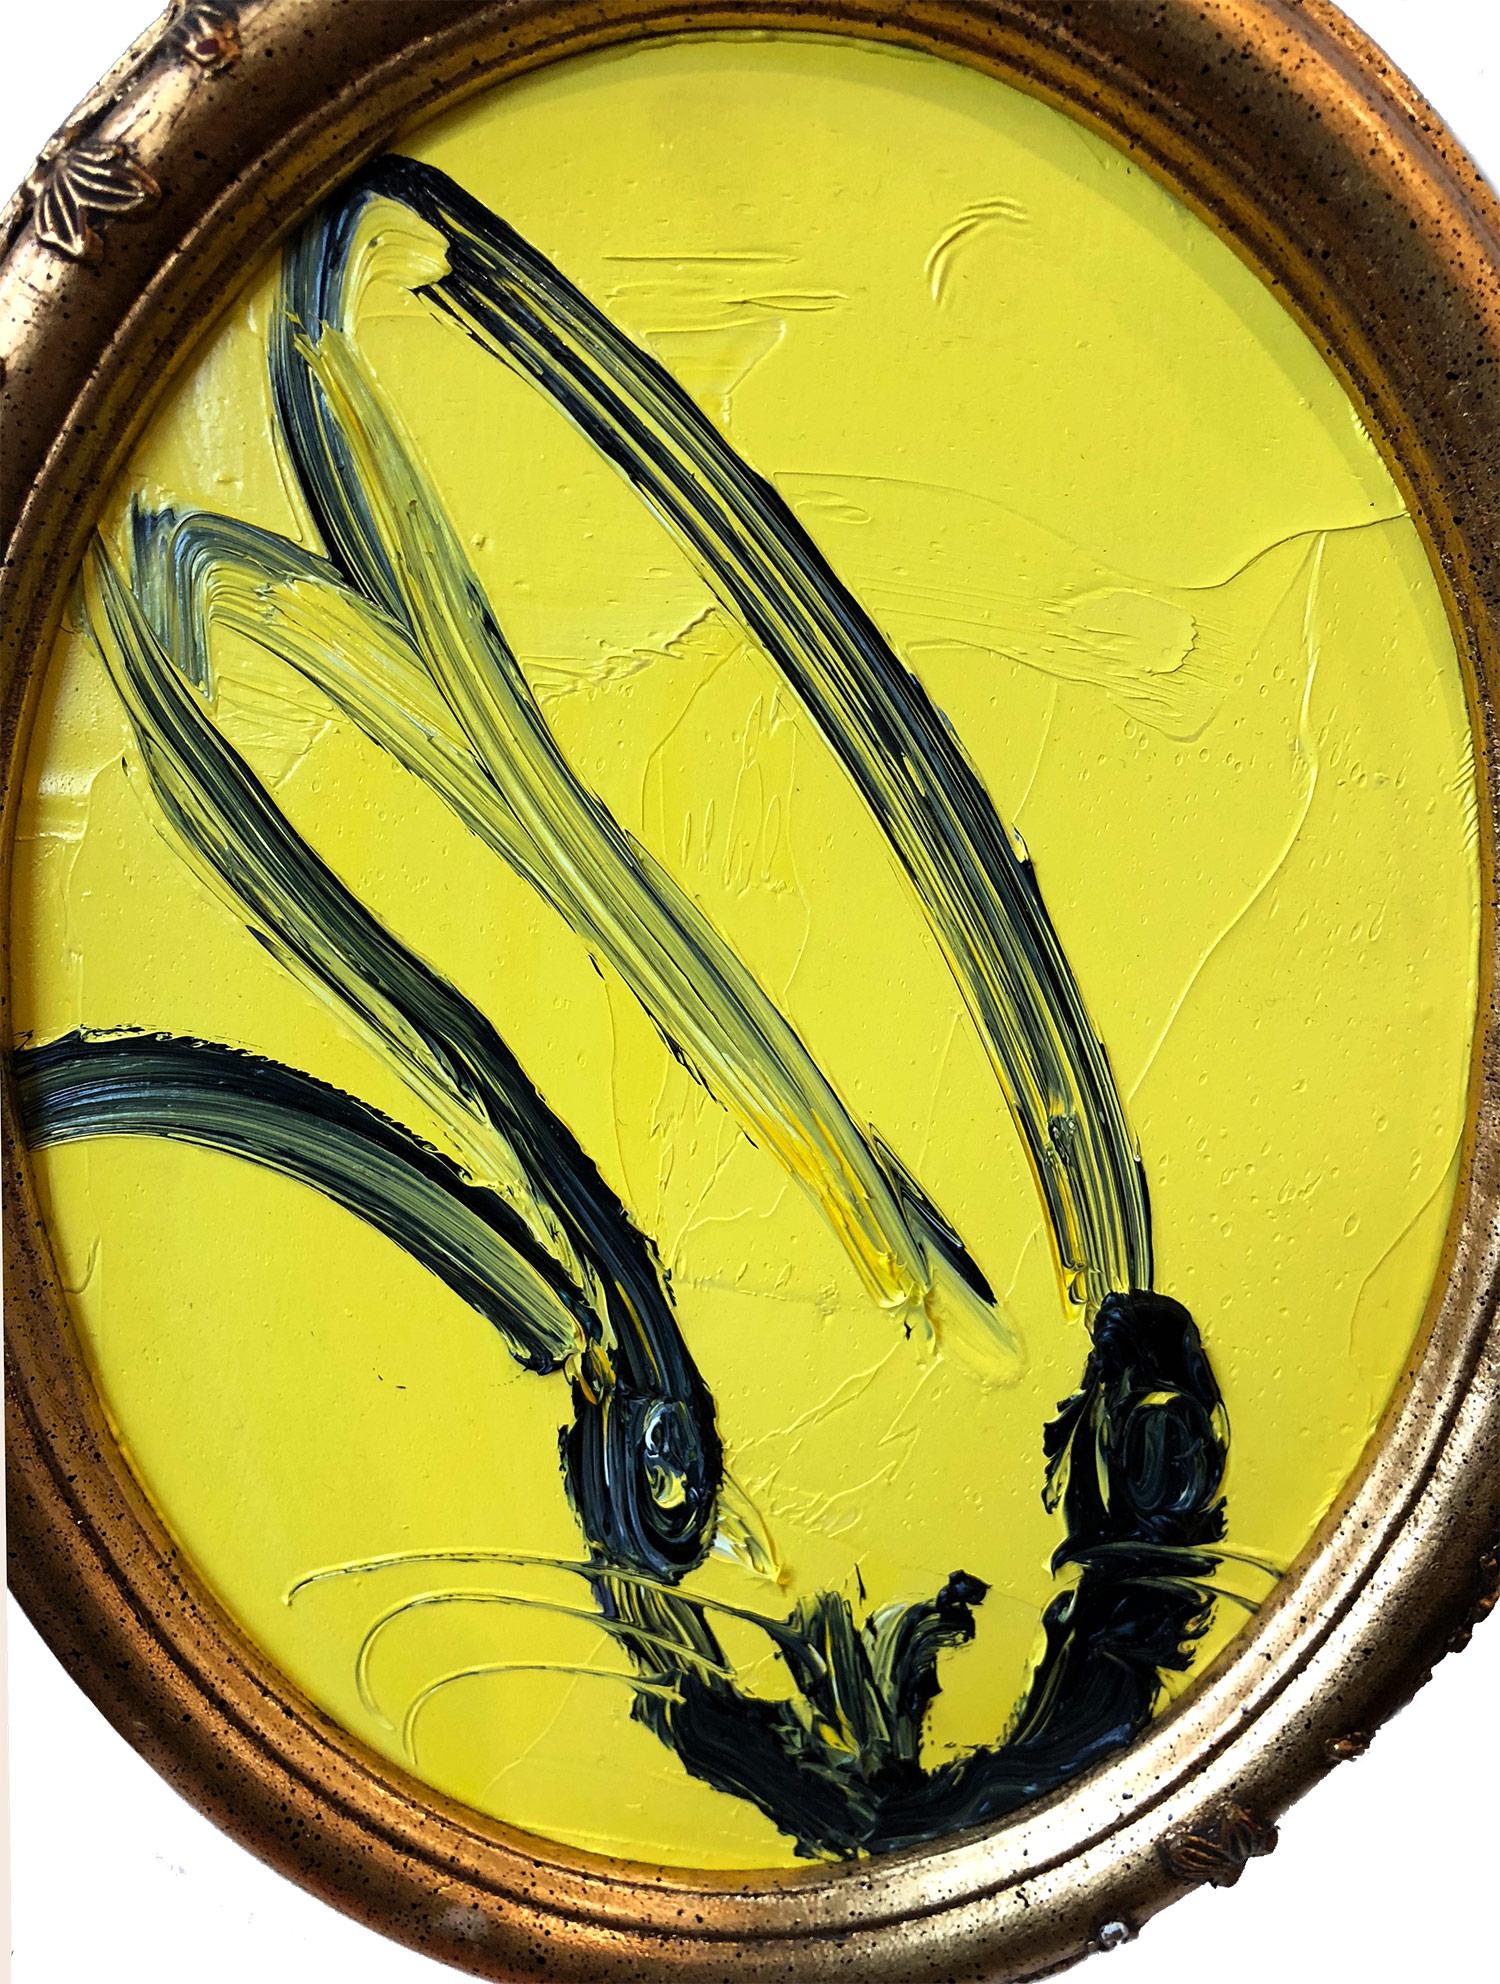 Untitled (Oval Bunny on Yellow) - Painting by Hunt Slonem